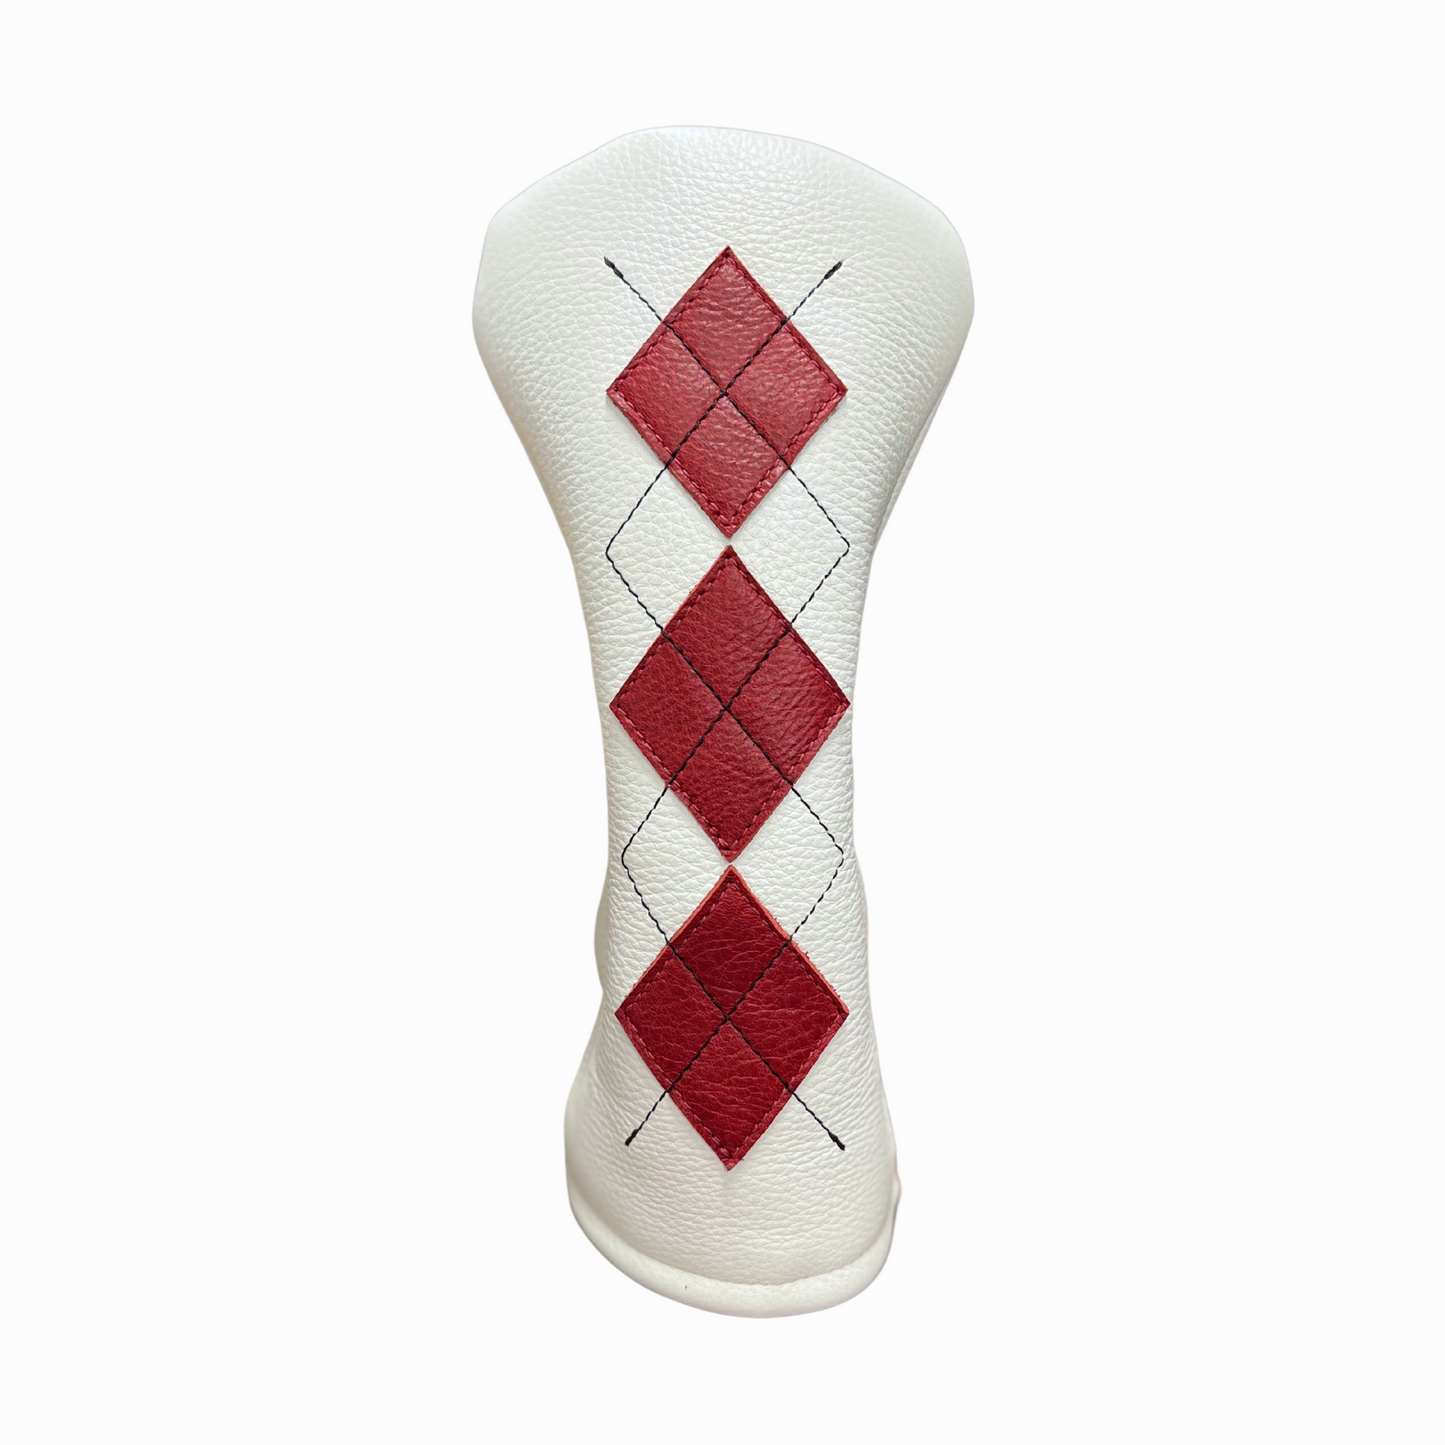 Pebbled White and Crimson Leather with Black Stitching